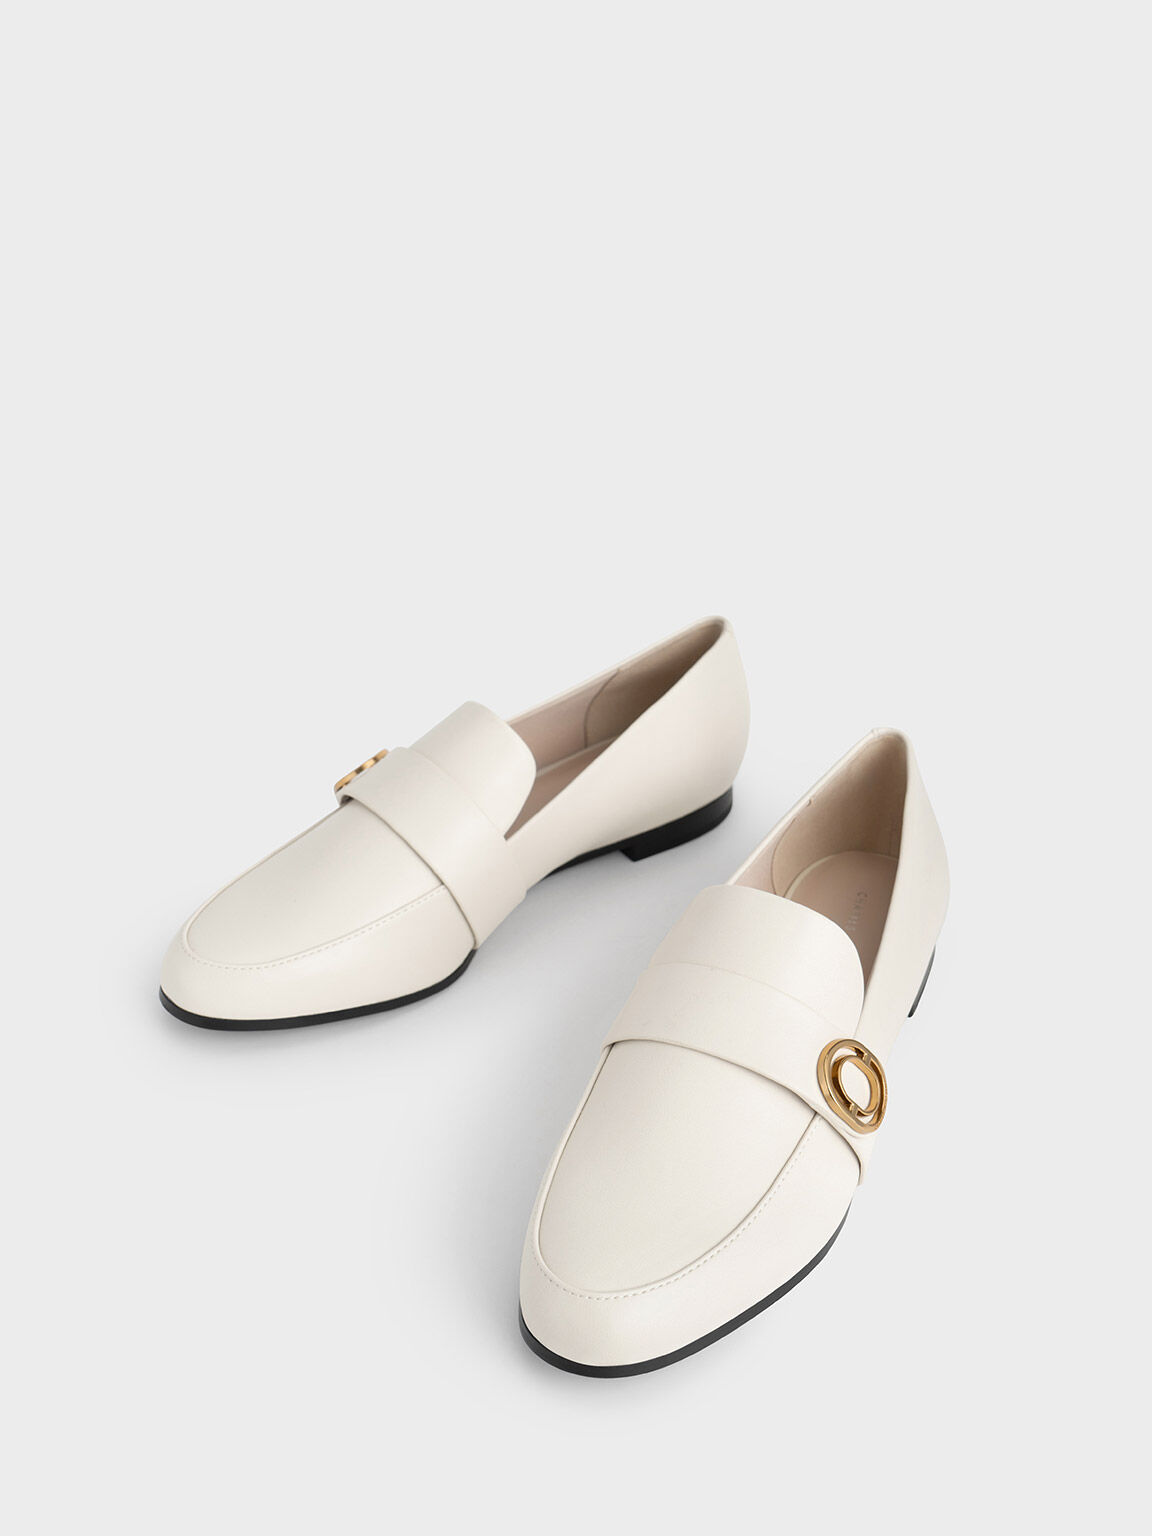 Metallic Accent Almond-Toe Penny Loafers, Chalk, hi-res